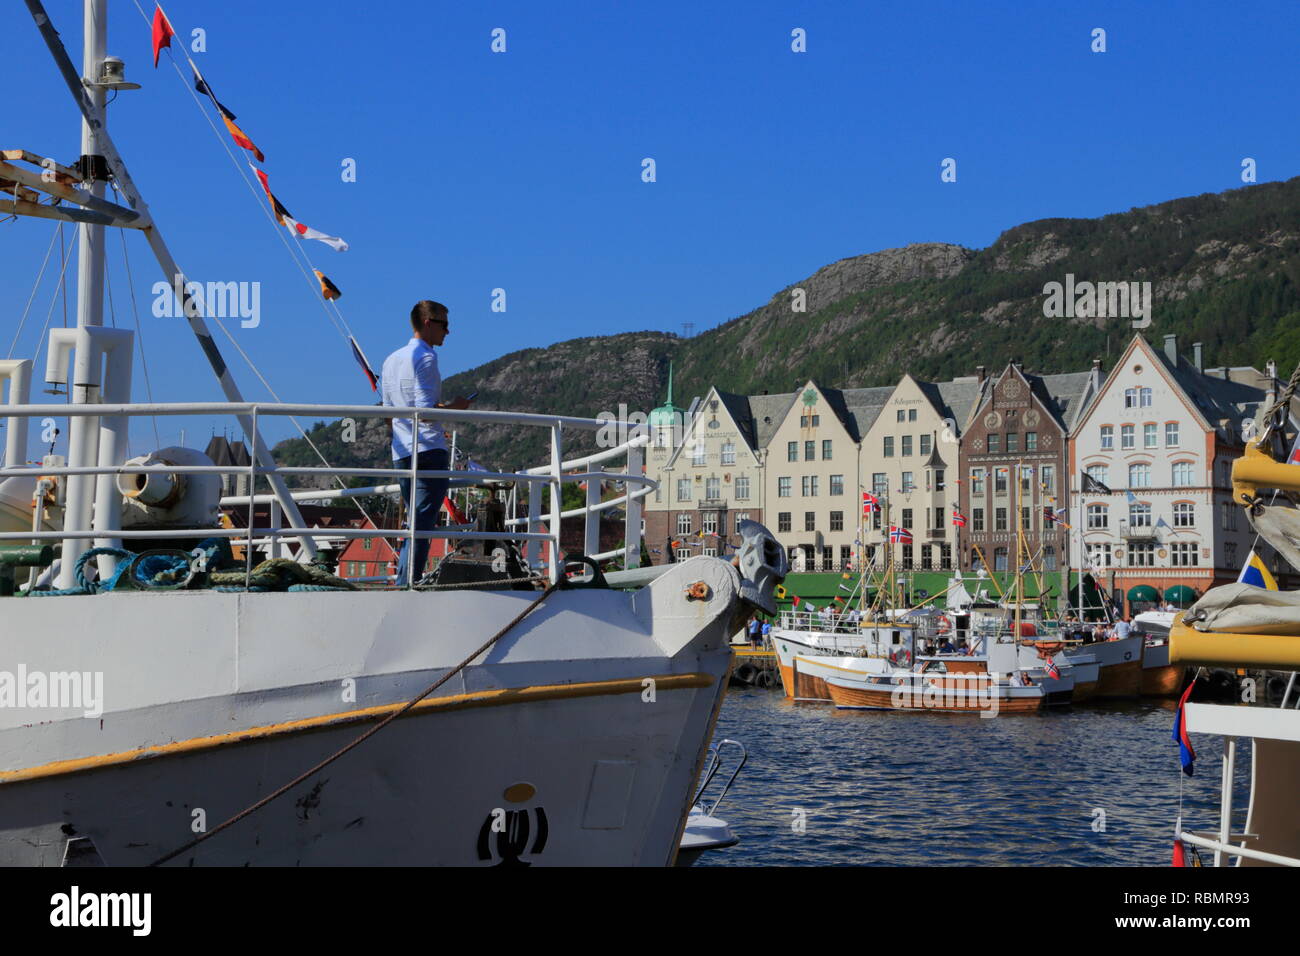 A young man stands on the deck of a boat docked in Bergen harbour, Norway, with a view of the Hanseatic buildings along Bryggen. Stock Photo